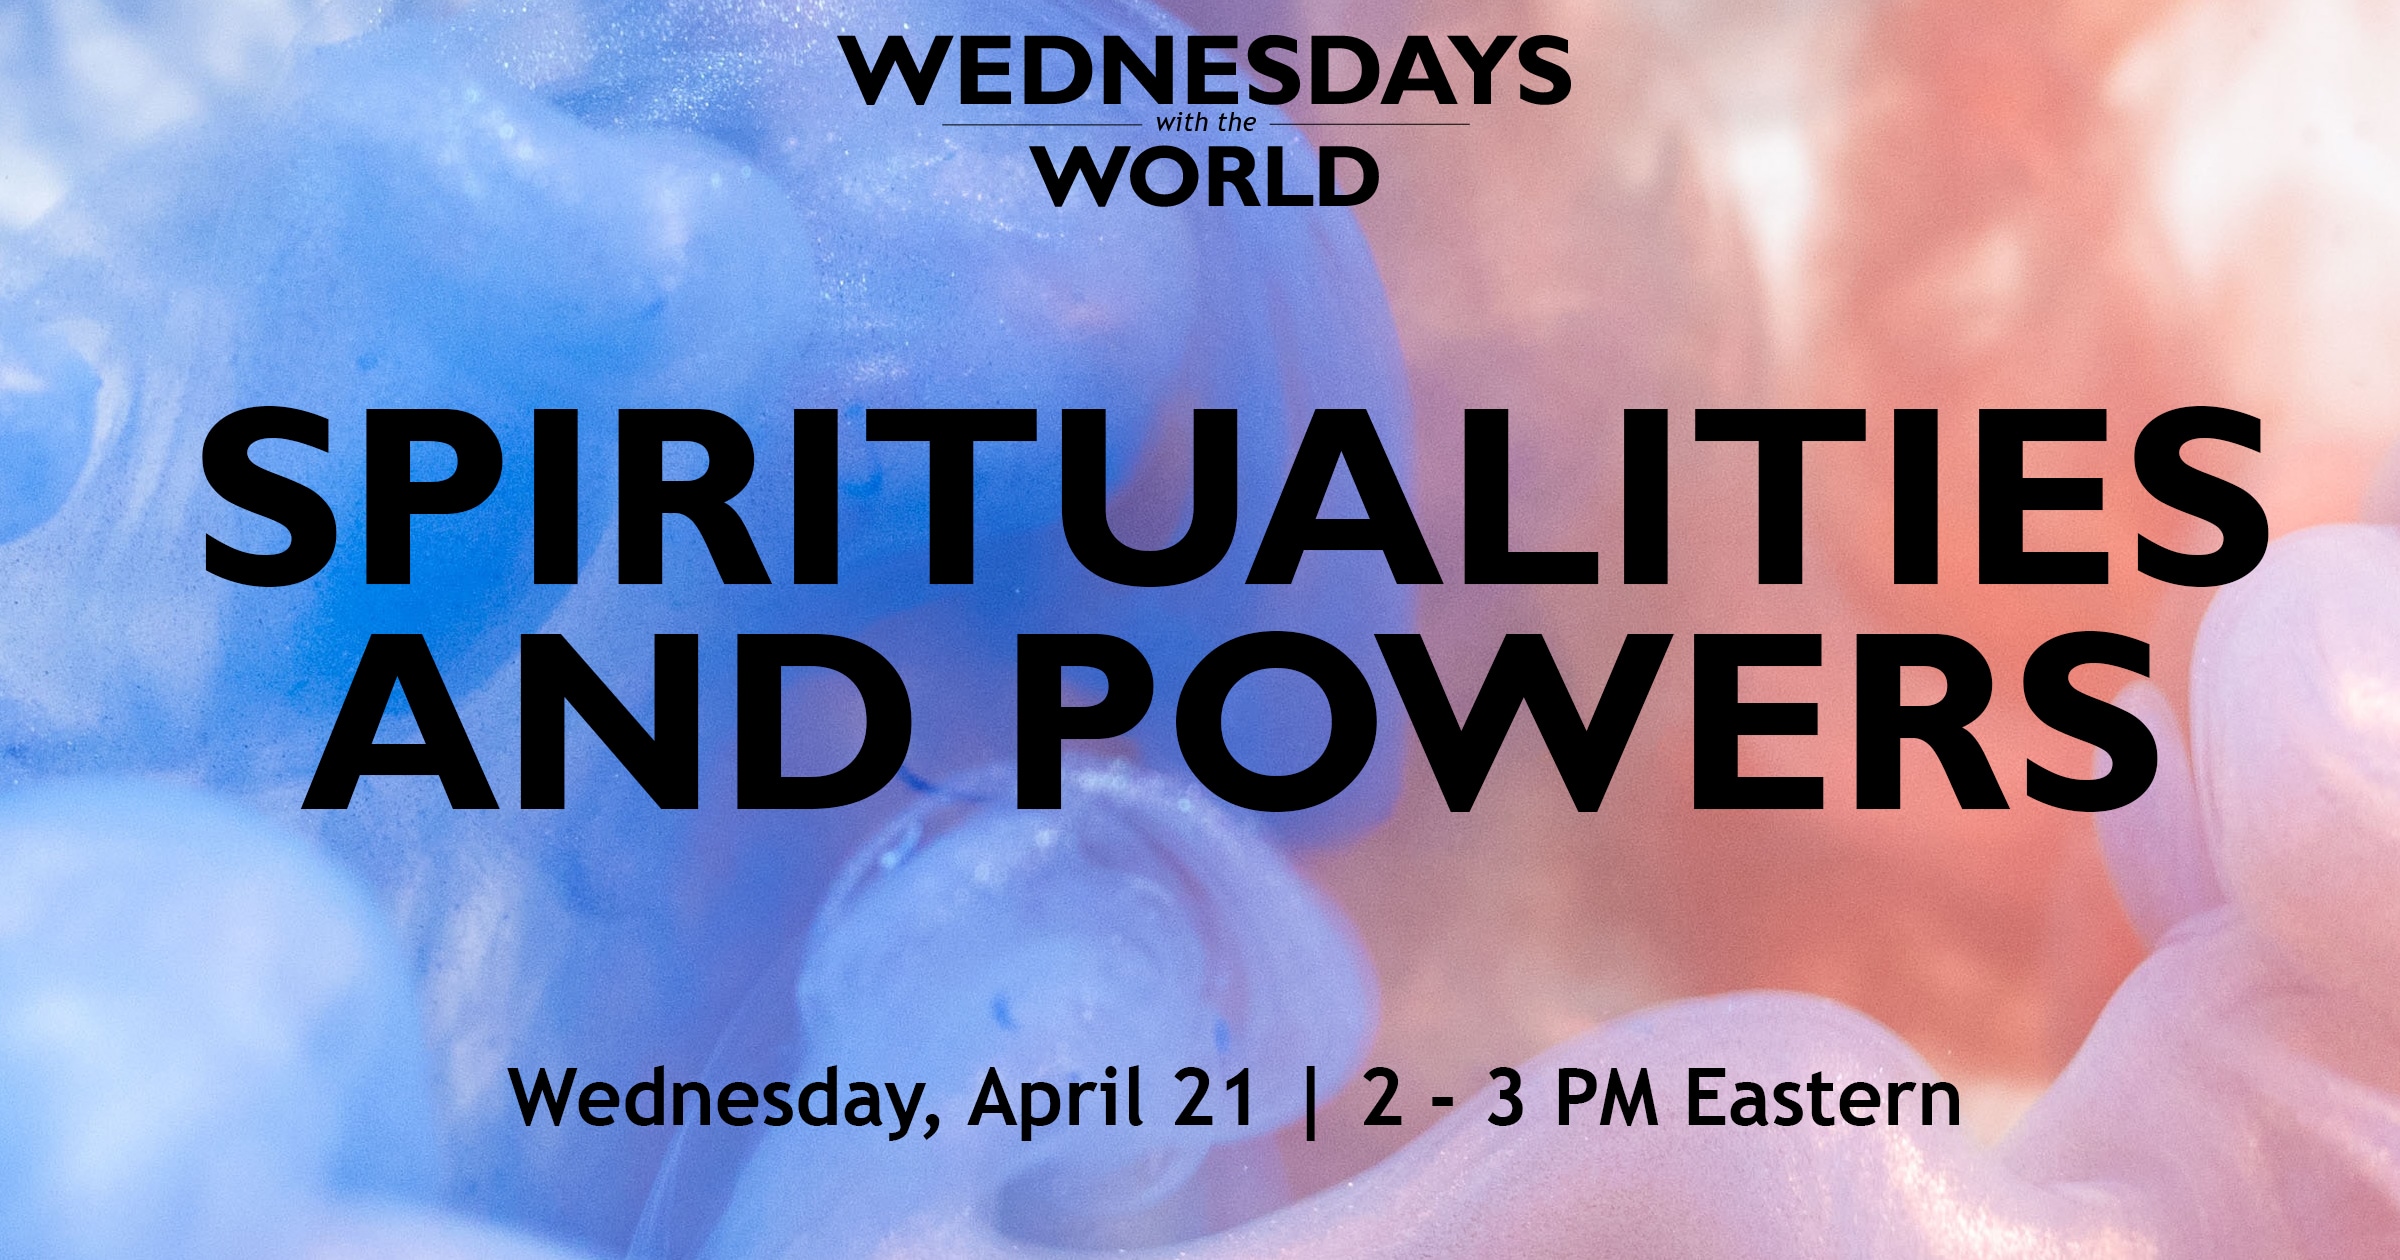 Wednesdays with the World- Spiritualities and Powers. Wednesday, April 21. 2-3 PM Eastern